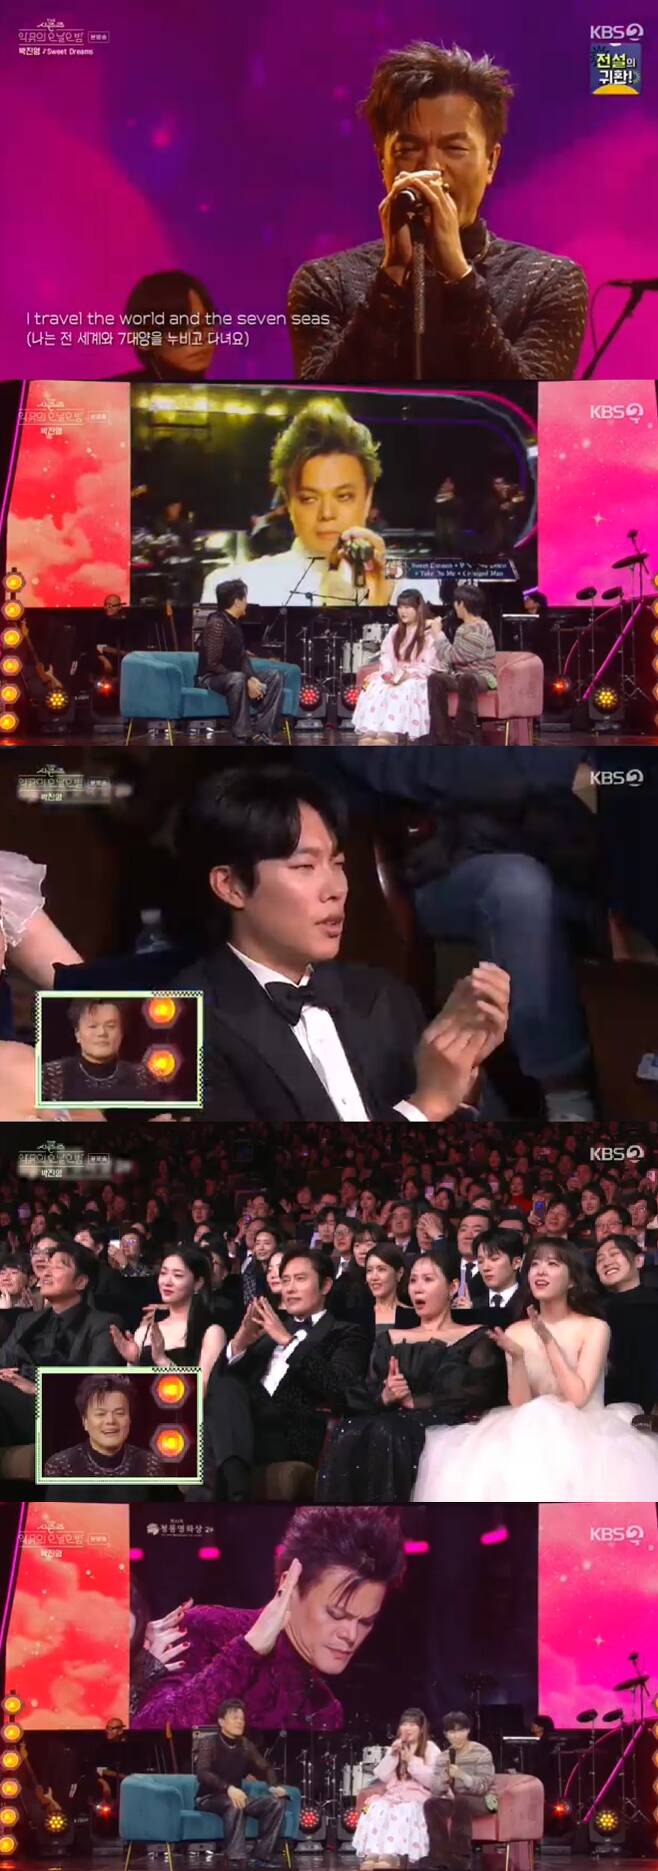 J. Y. Park commented on the Blue DragonMovie Awards Celebration Stage and reenacted the stage with clarification.On the 8th KBS 2TV the seasons - Evil communitys Onal Night (hereinafter referred to as Onal Night), J. Y.Park, Zion.T (Zion.T), Heize (Heize), 10CM, and Yoo Seung-woo appeared.On this day, J. Y. Park mentioned the unconventional stage at the 44th Blue DragonMovie Awards celebration stage, which became a hot topic recently.At that time, J. Y. Park shocked audiences such as actors with unstable live performances.J. Y. Park said, The neck management is also a skill, so I came back to the neck management.On this day, Lee Chan-hyuk introduced J. Y. Park, saying, You are the one who wants to do everything you want to do.J. Y. Park has been singing a medley of famous songs such as Sweat Dreams and When we Disco in the same composition as the Blue Dragon Film Festival stage.He filled the perfect stage with unwavering pitch and solid vocals in intense choreography.J. Y. Park, who met the Evil community after the stage. The Evil community referred to the Blue Dragon film festival stage, and the stage appeared in the studio at the time.J. Y. Park laughed every time he saw the reactions of actors who could not hide their color or surprise.Lee Soo-hyun admired, I did not know I could see this stage in Korea.J. Y. Park said, I did the performance I did at the Blue Dragon Film Festival today. I was only looking for this stage.At the Blue Dragon film festival, I had a sore throat. It was Friday, but I pre-recorded it at 6 am the day before and shot GoldenGirls and Song Festival. Suddenly my throat did not come out.At that time, clothes and makeup were all good. Lee Chan-hyuk said, You said that you were good at managing your neck during our audition.J. Y. Park said, Thats right. So I could not say anything because I could not make excuses. I did it again today. If anyone around you says Blue Dragon J. Y. Park WhyPlease tell me again, I did it on the night of the day, he said, emphasizing it to wash the Blue Dragon lust and laughed.Photo = KBS 2TV broadcast screen